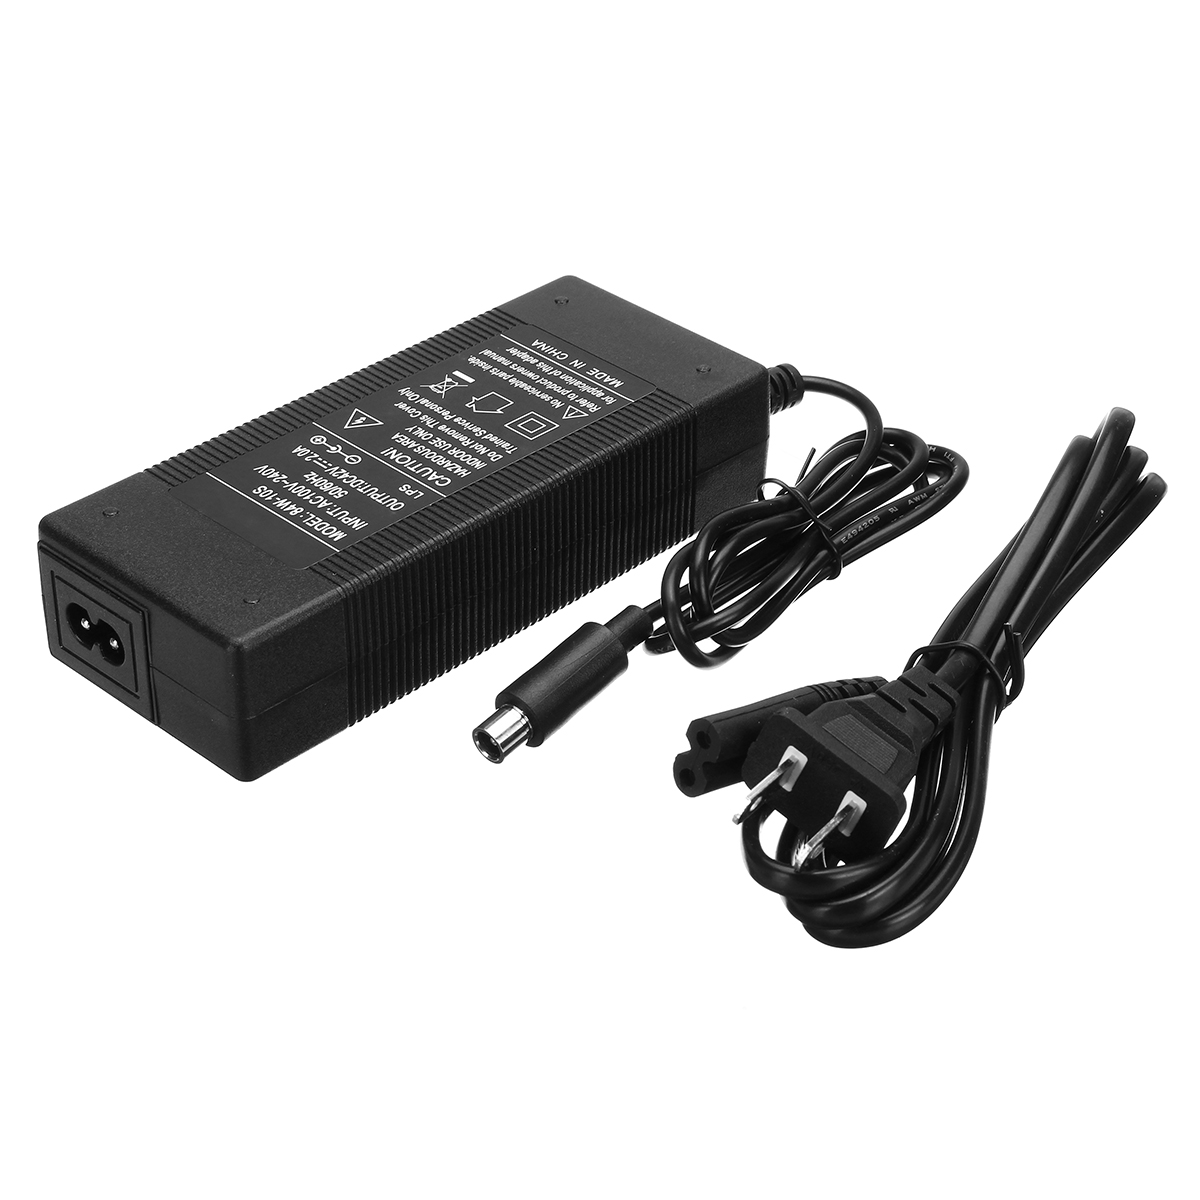 DC42V-17A-Lithium-Battery-Charger-Battery-Equipment-for-Scooter-For-Ninebot-Scooter-1417293-4